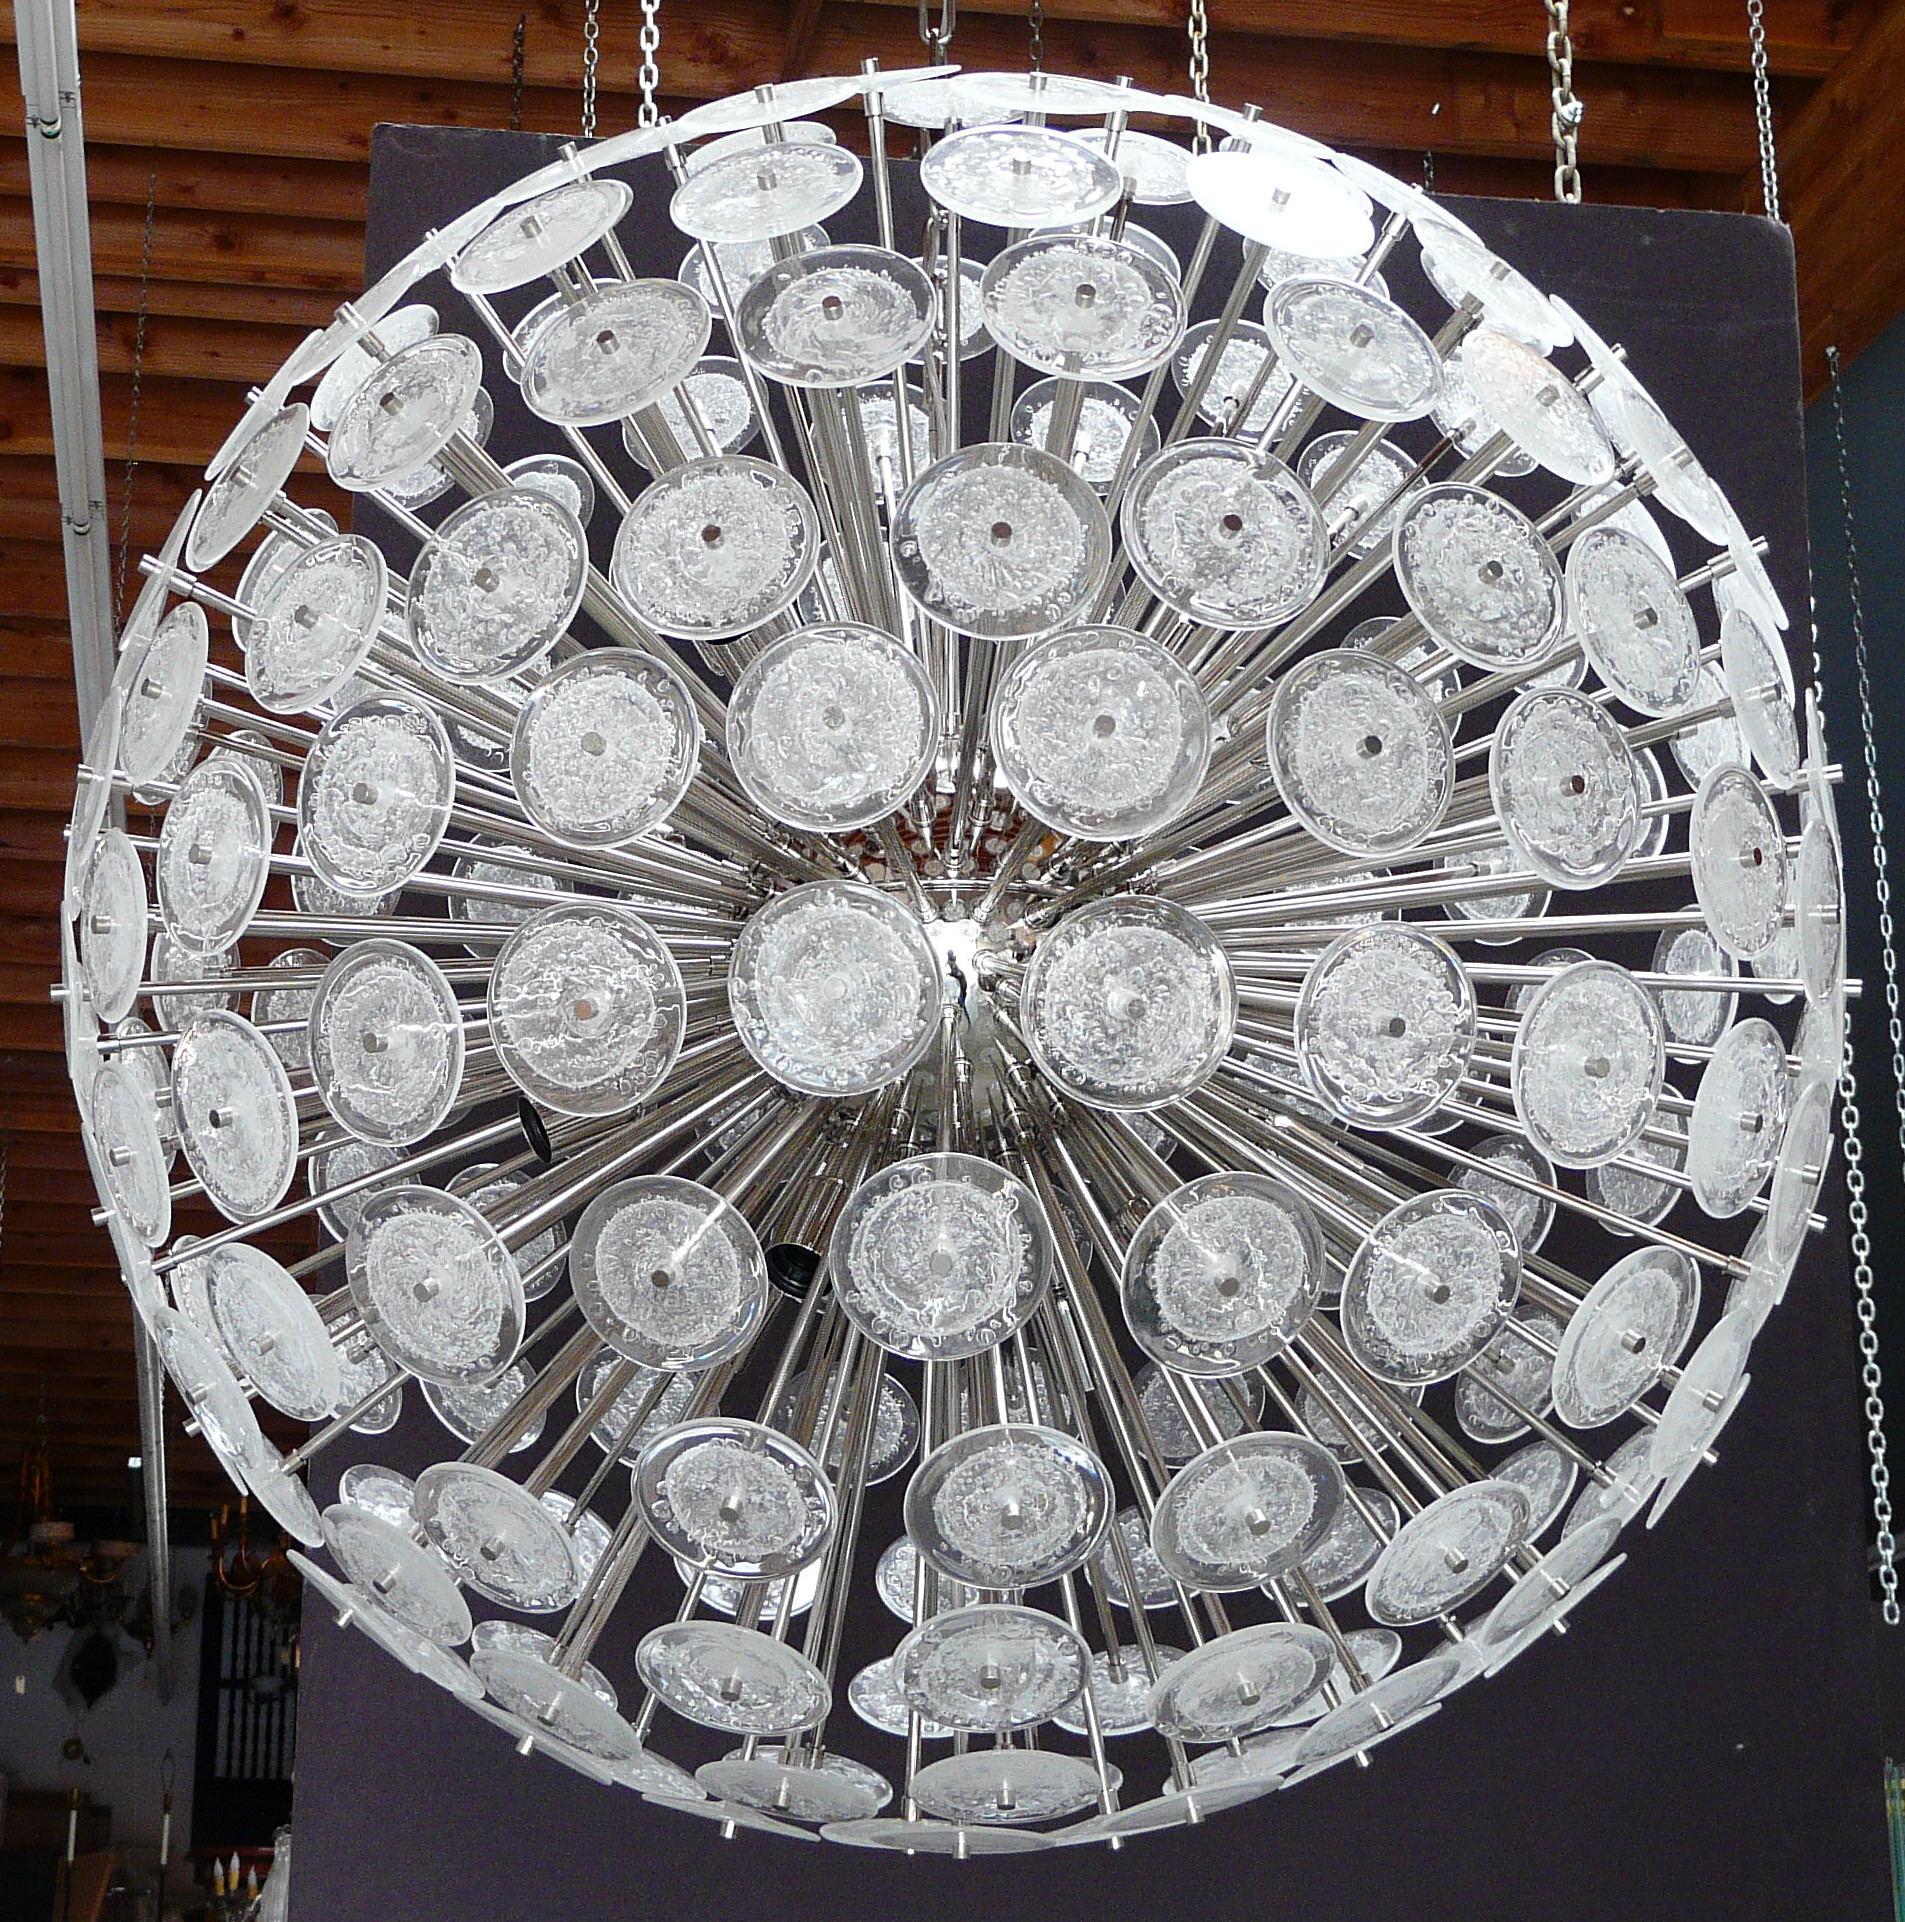 Italian round sputnik chandelier with clear Murano glass discs hand blown with bubbles using Pulegoso technique, mounted on nickel finish metal frame by Fabio Ltd / Made in Italy
16 lights / E26 or E27 type / max 60W each
Measures: Diameter 43.5